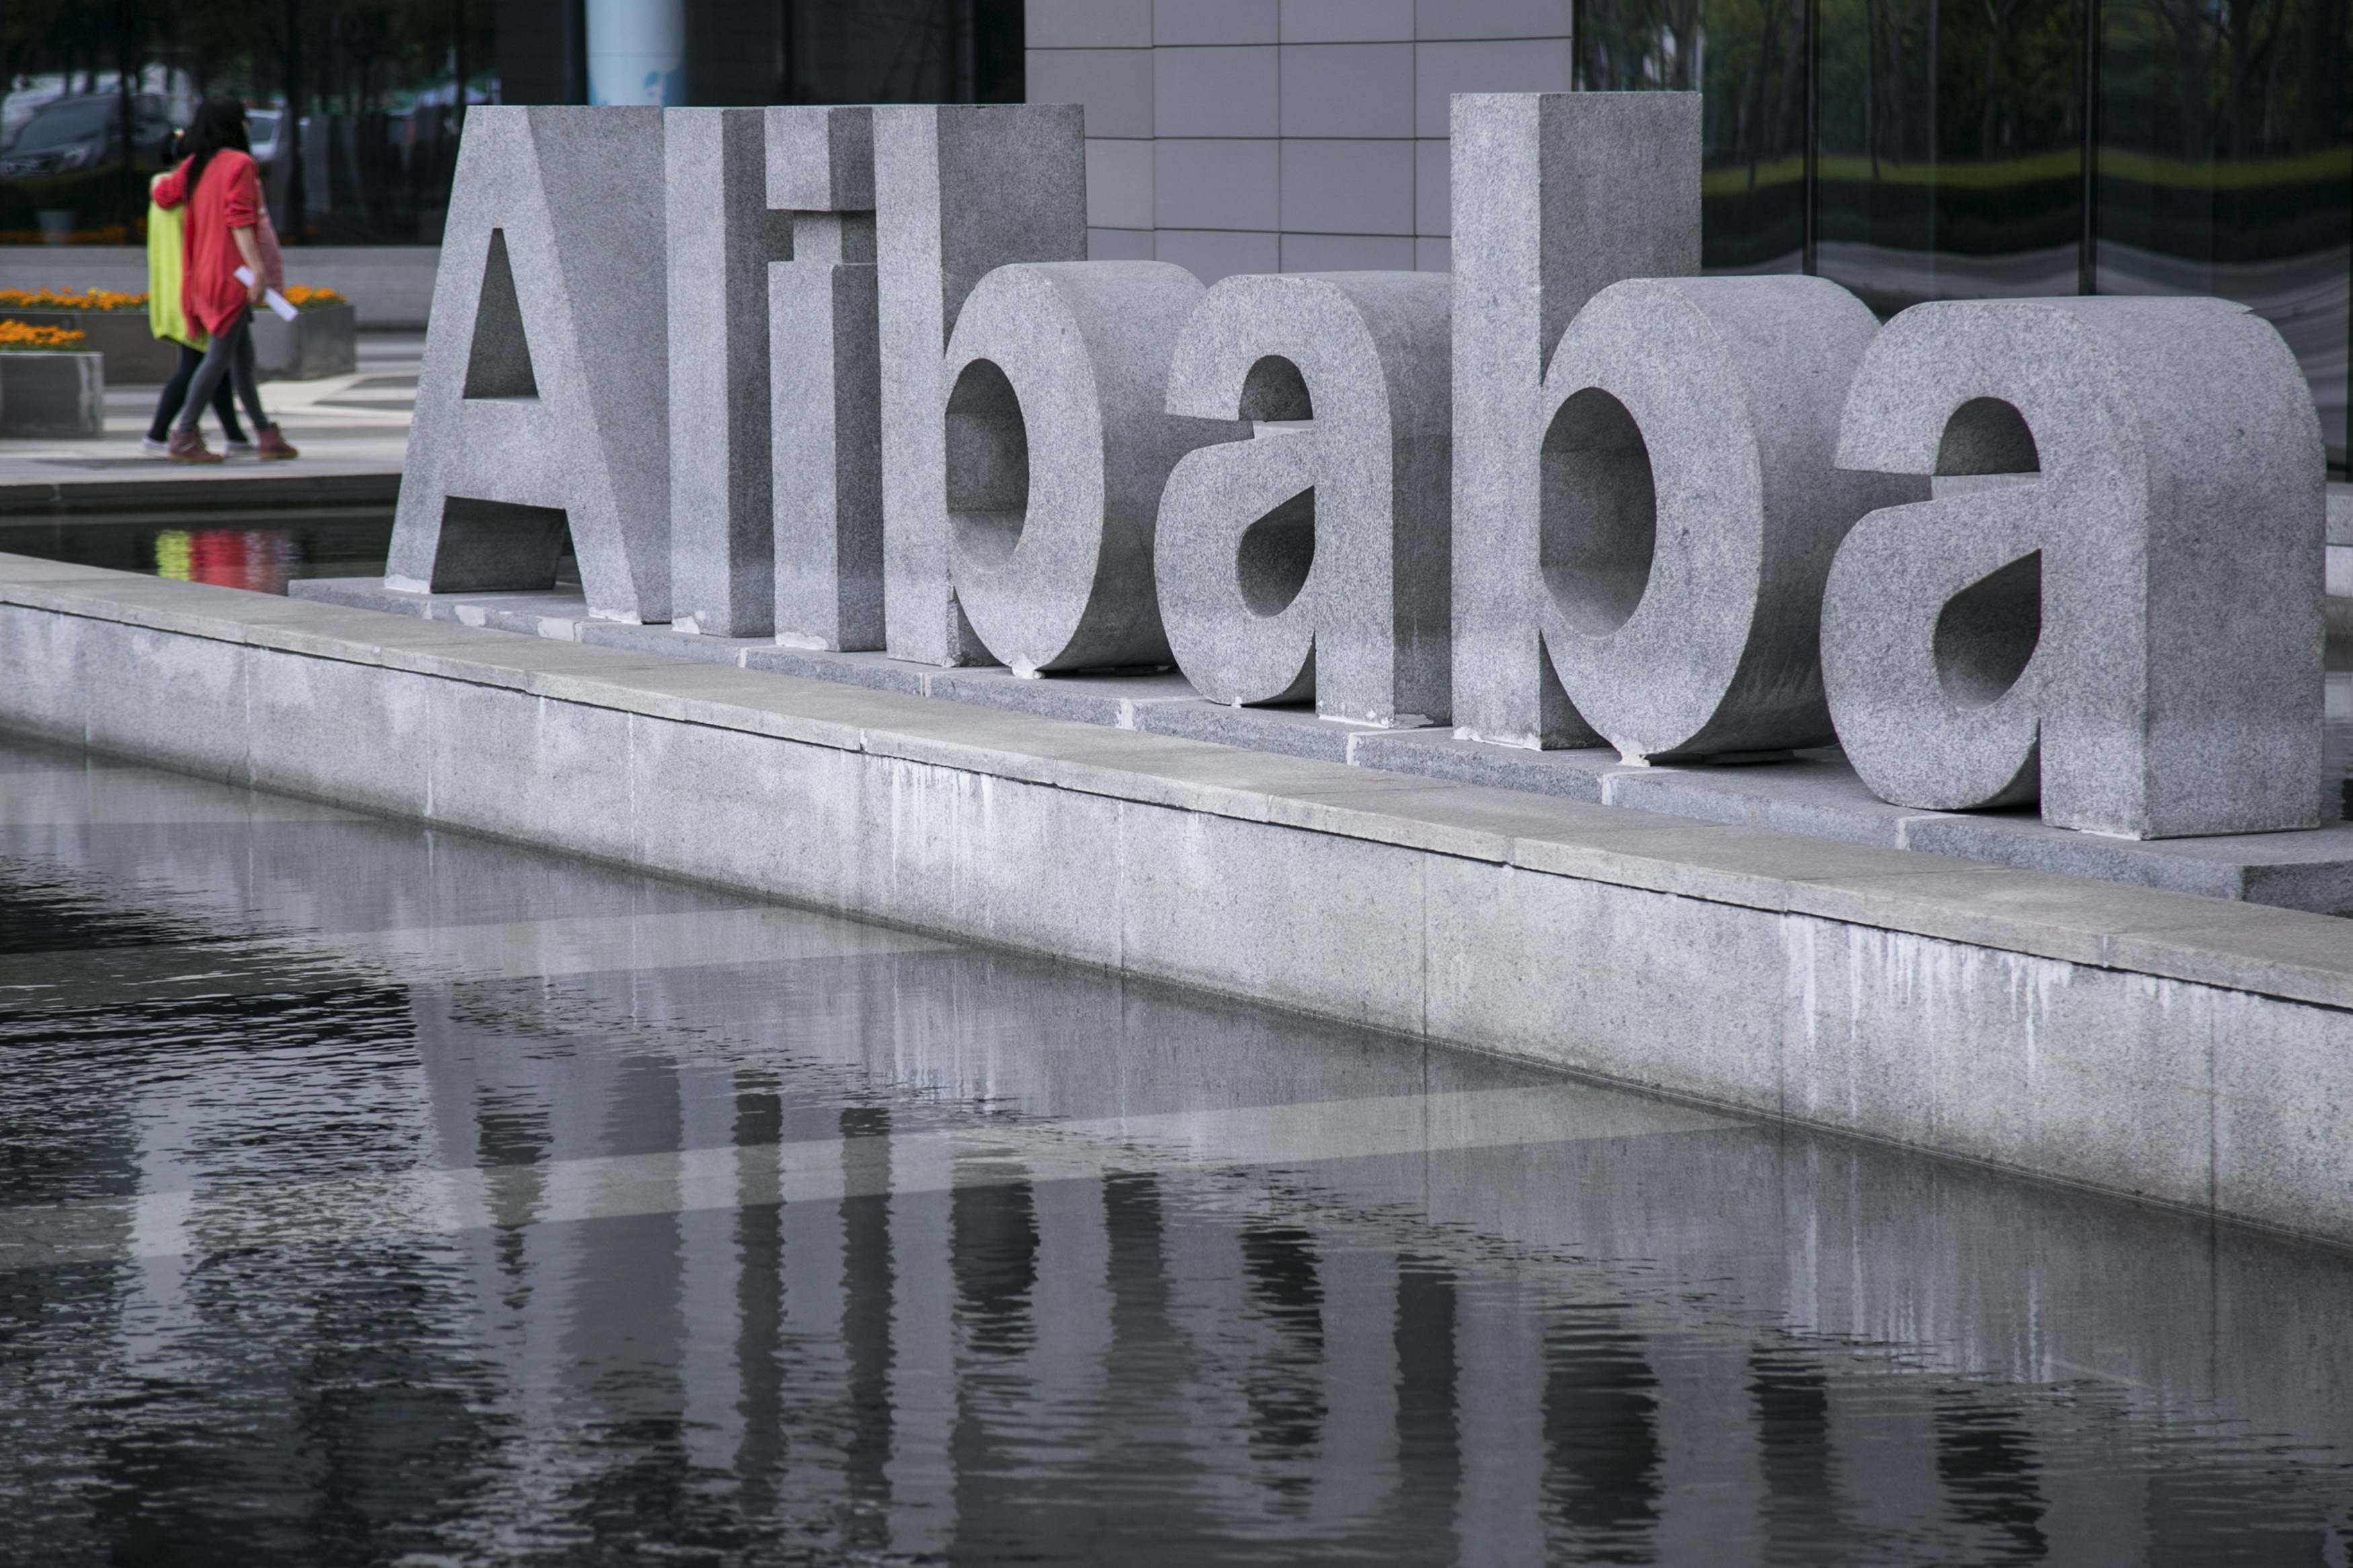 People walk at the headquarters of Alibaba in Hangzhou, Zhejiang province, in this April 23, 2014 file photo. Chinese e-commerce company Alibaba Group Holding Ltd said its expects to price its initial public offering at between $60 and $66 per American Depository share, September 5, 2014. REUTERS/Chance Chan (CHINA - Tags: BUSINESS) CHINA OUT. NO COMMERCIAL OR EDITORIAL SALES IN CHINA